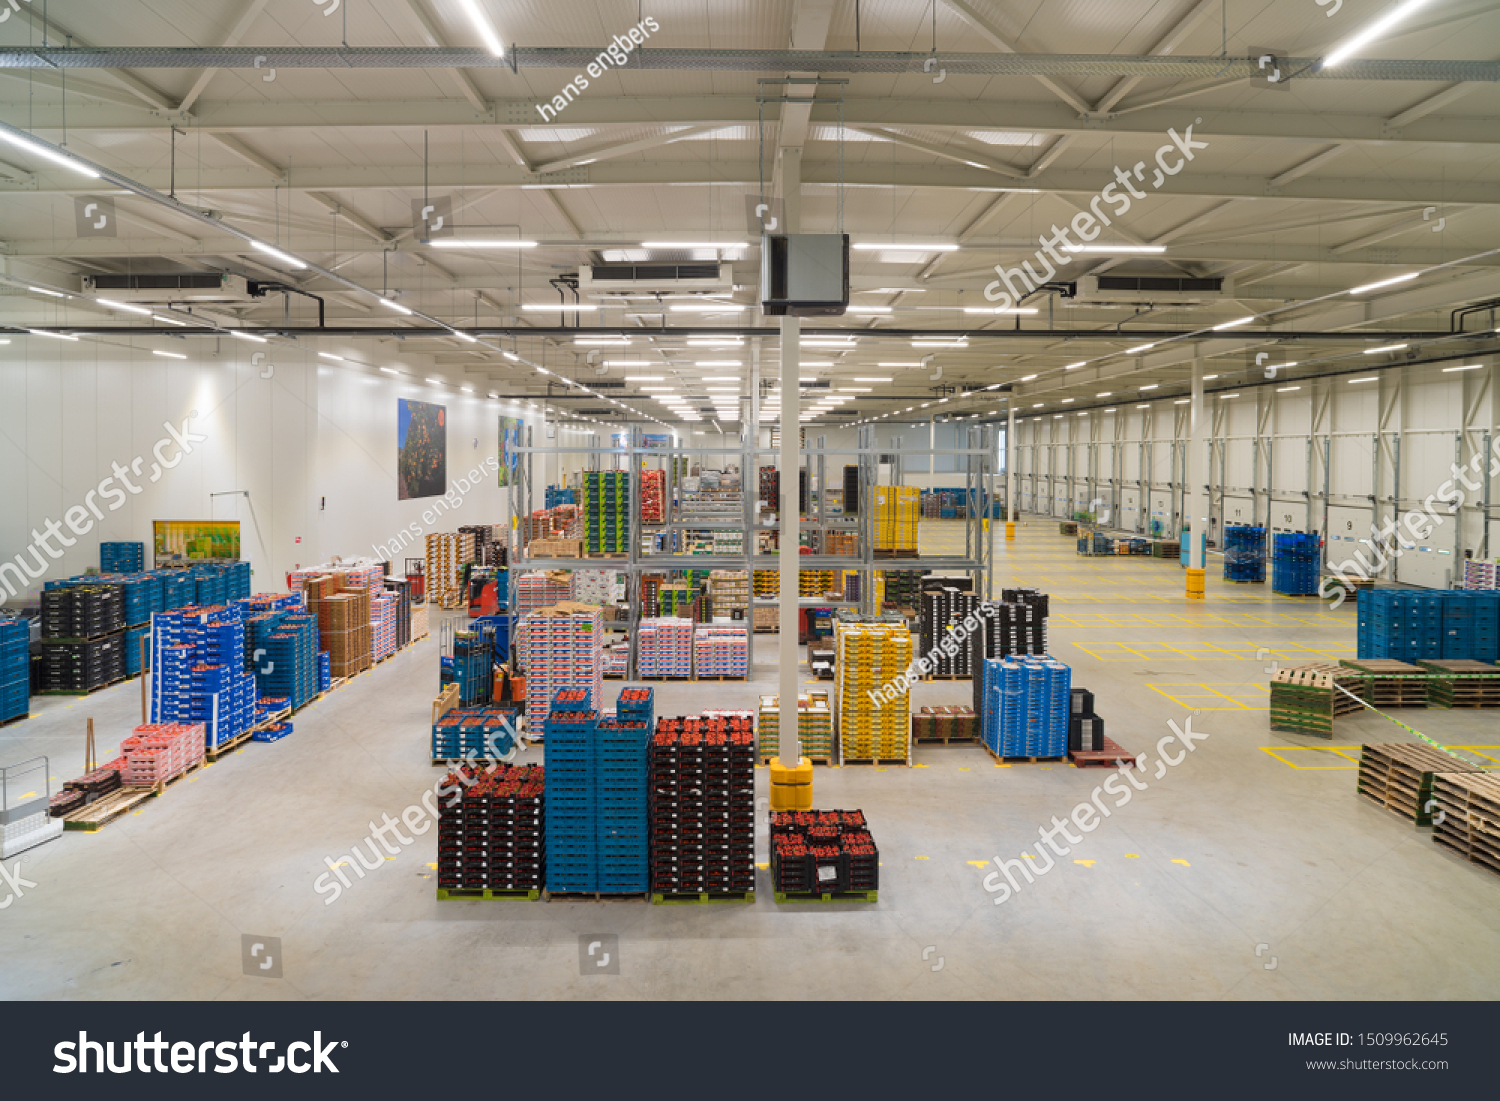 IJSSELMUIDEN, NETHERLANDS - APRIL 6, 2019: Interior of a warehouse of a fruit and vegetables wholesale business #1509962645